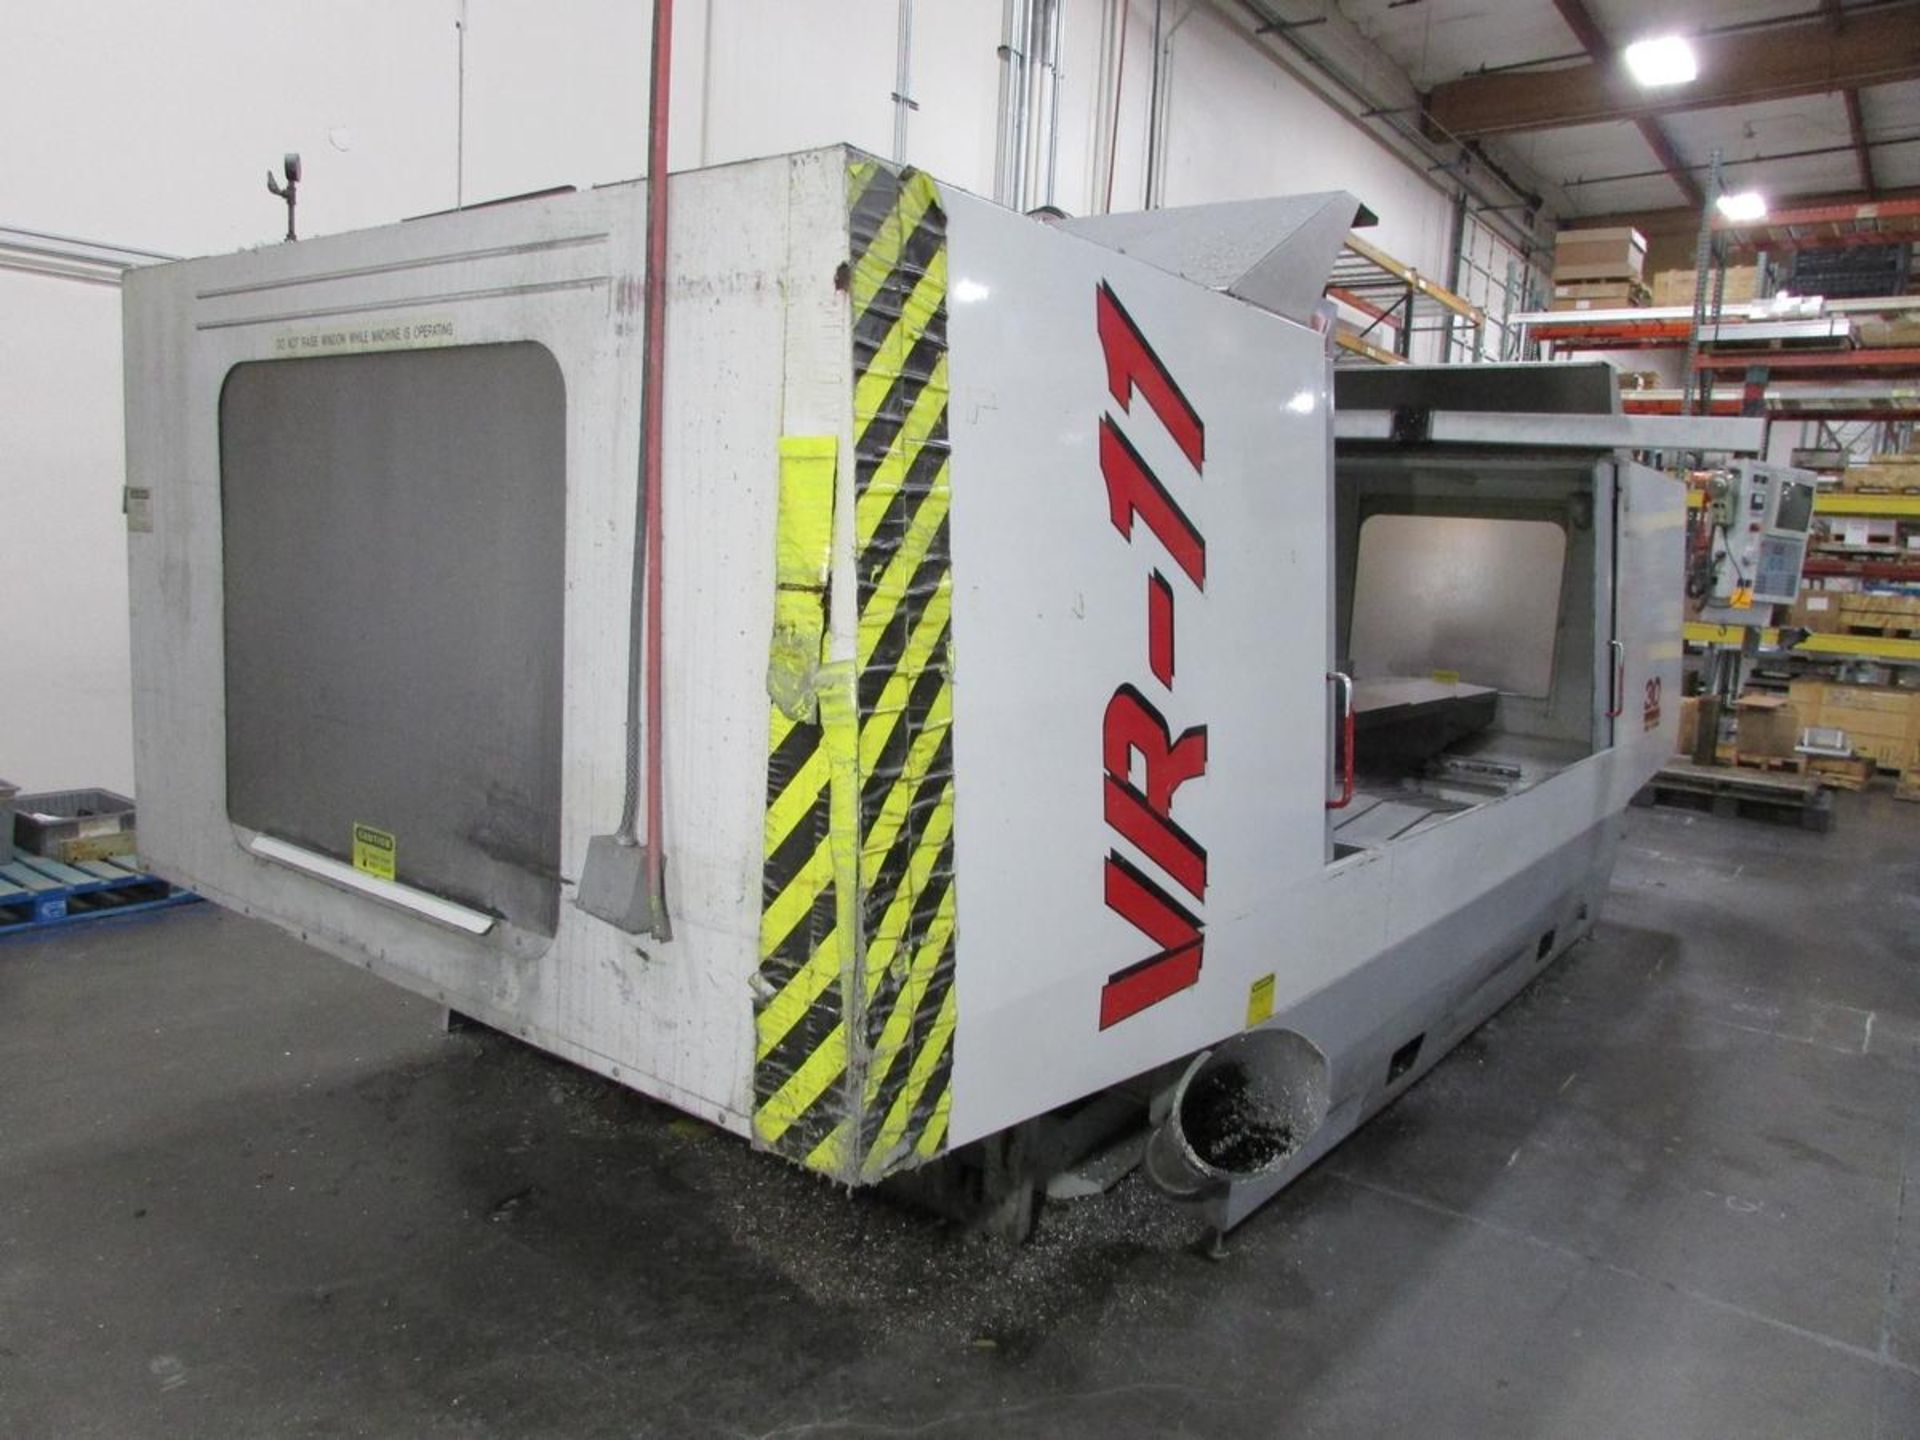 1997 Haas VR-11 5-Axis CNC Vertical Maching Center - Image 25 of 30